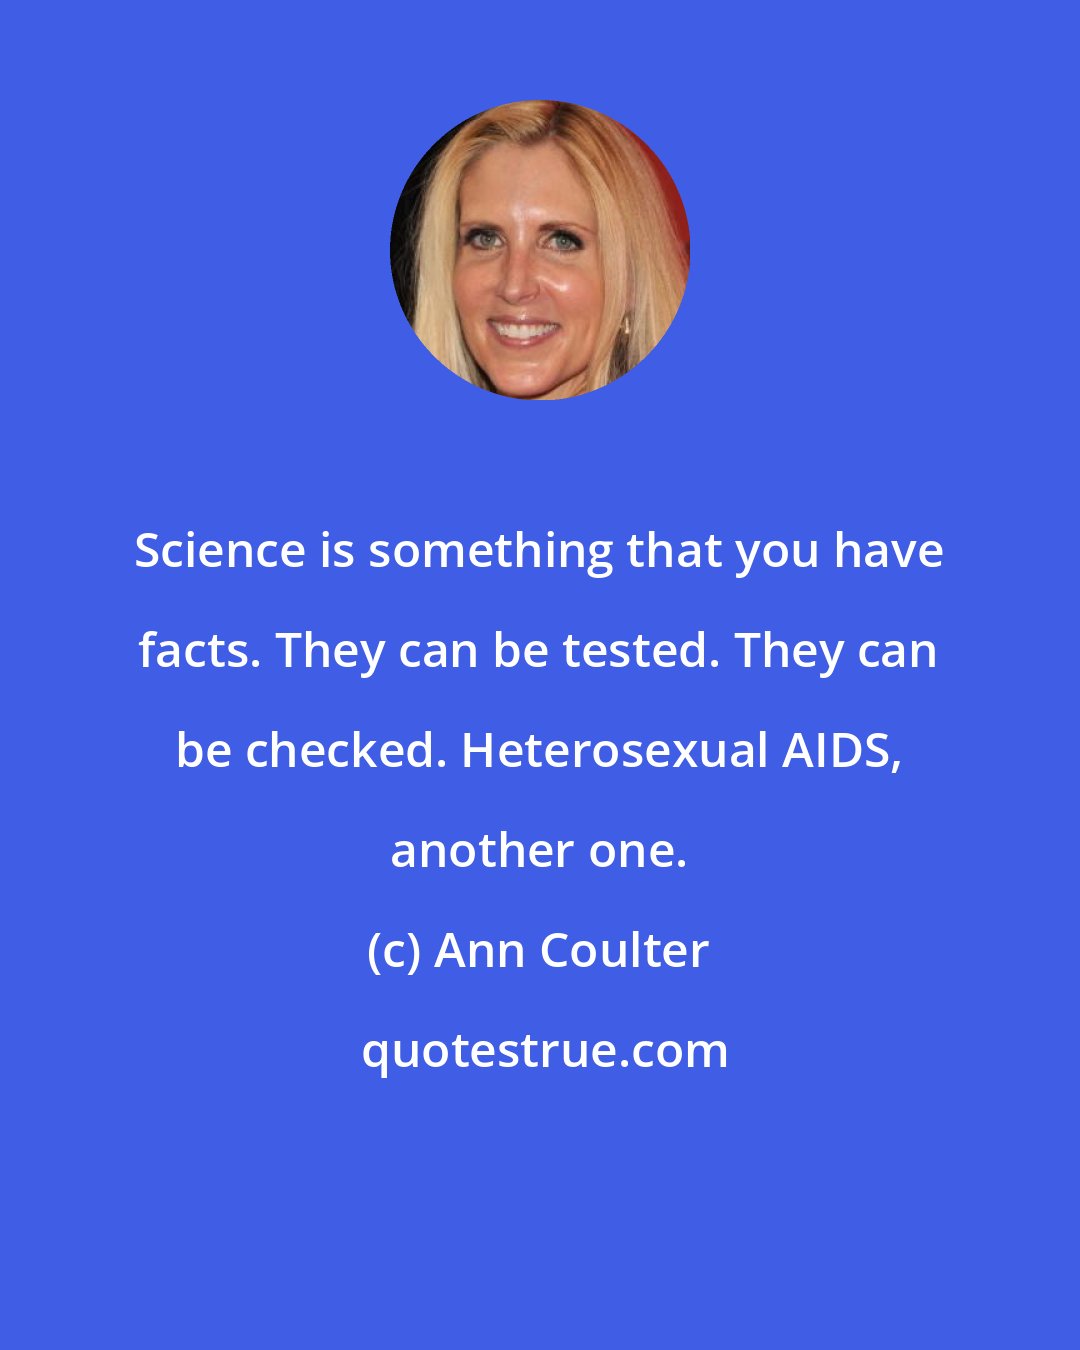 Ann Coulter: Science is something that you have facts. They can be tested. They can be checked. Heterosexual AIDS, another one.